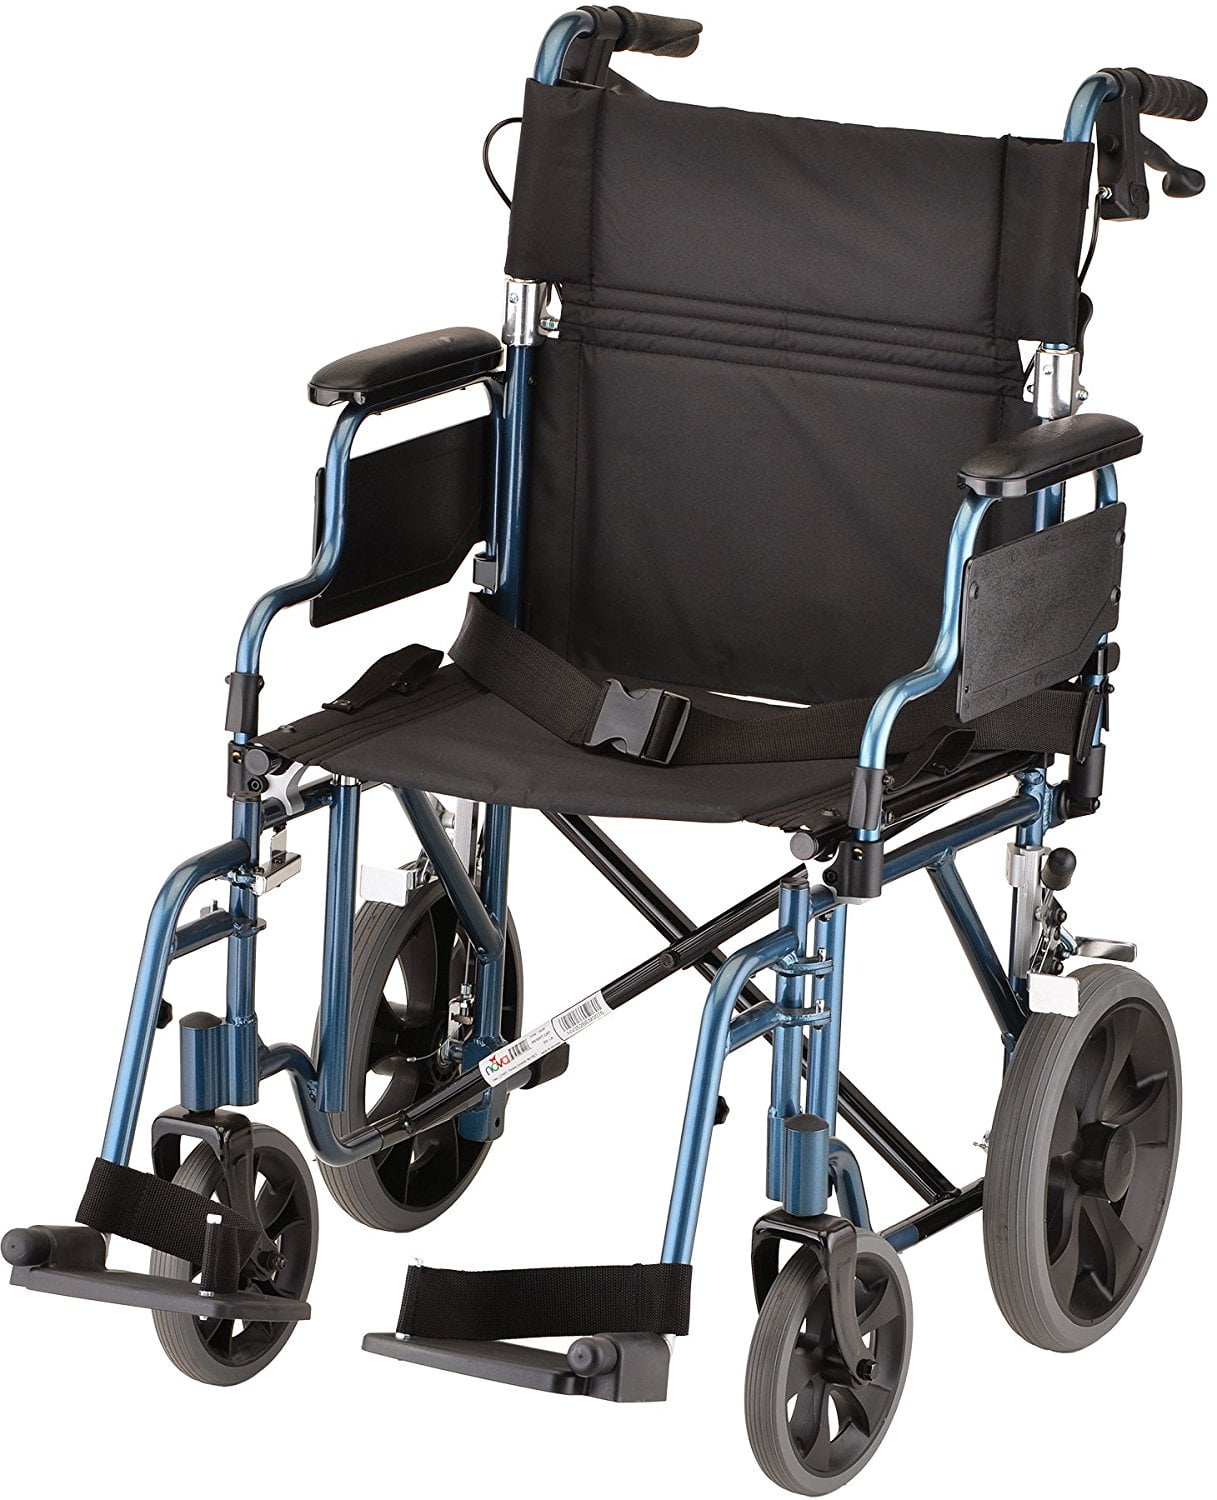 New Transport Chair Or Wheelchair for Large Space